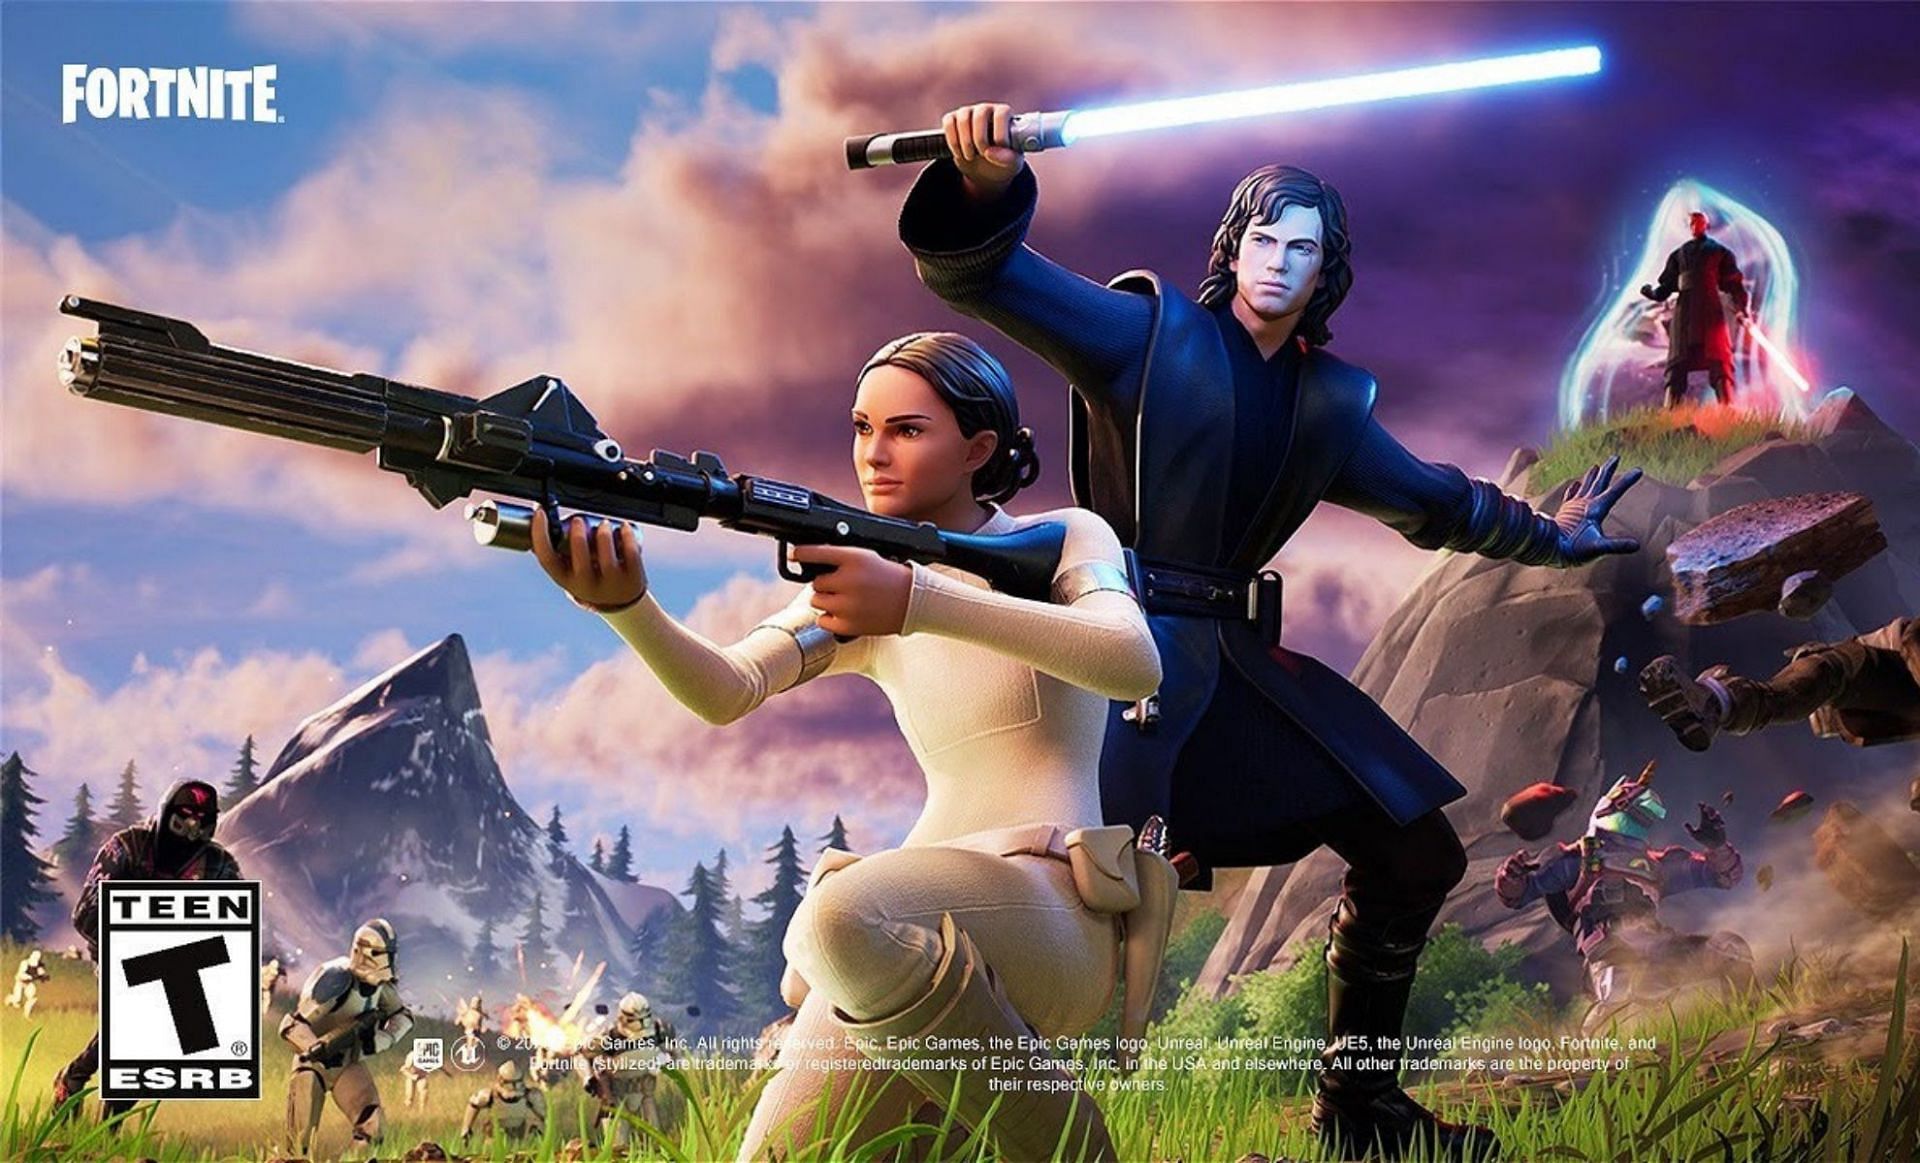 Land during Find the Force (Image via Fortnite on YouTube)